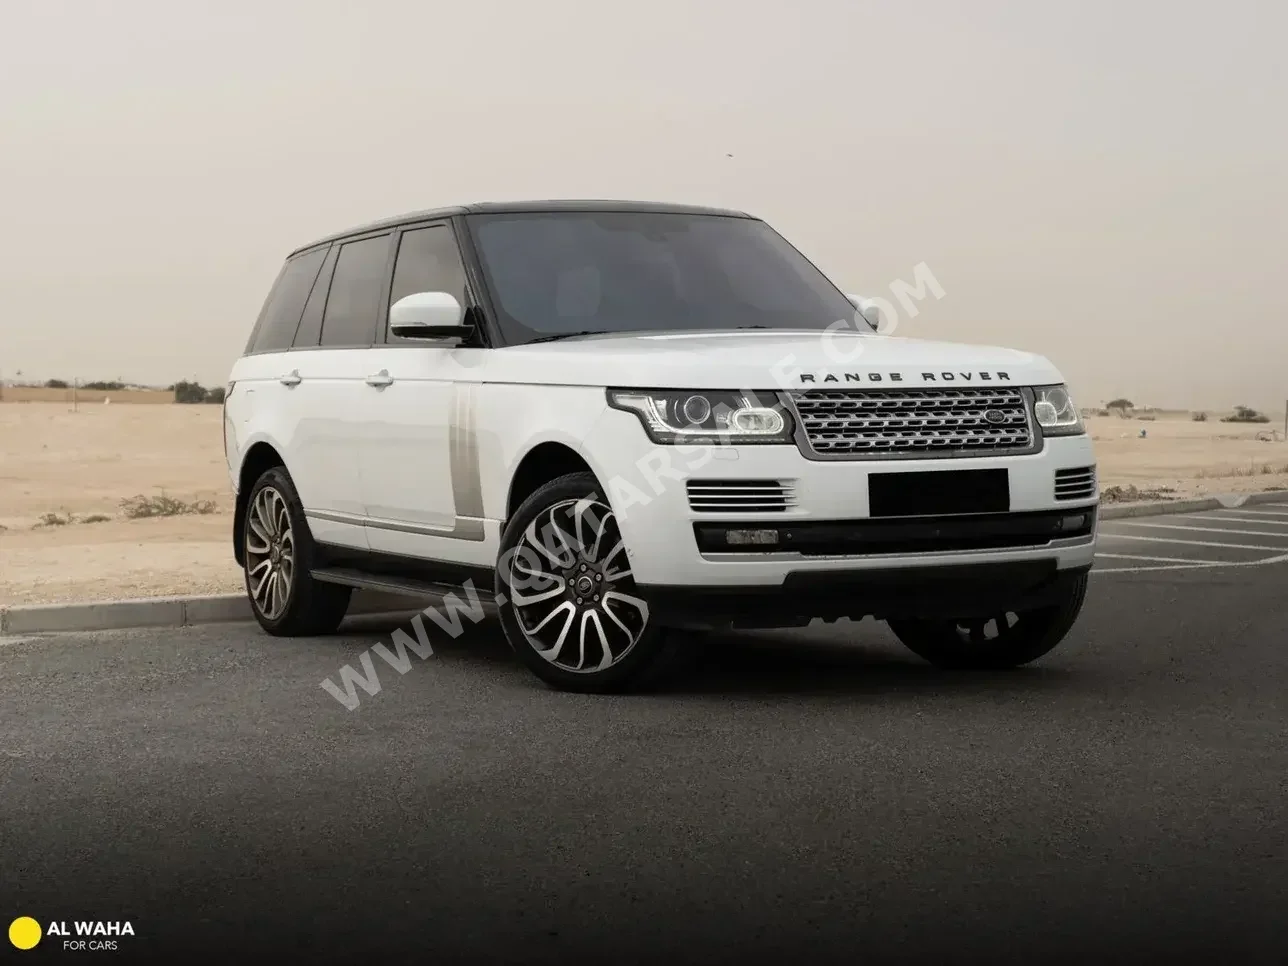 Land Rover  Range Rover  Vogue  Autobiography  2014  Automatic  248,000 Km  8 Cylinder  Four Wheel Drive (4WD)  SUV  White